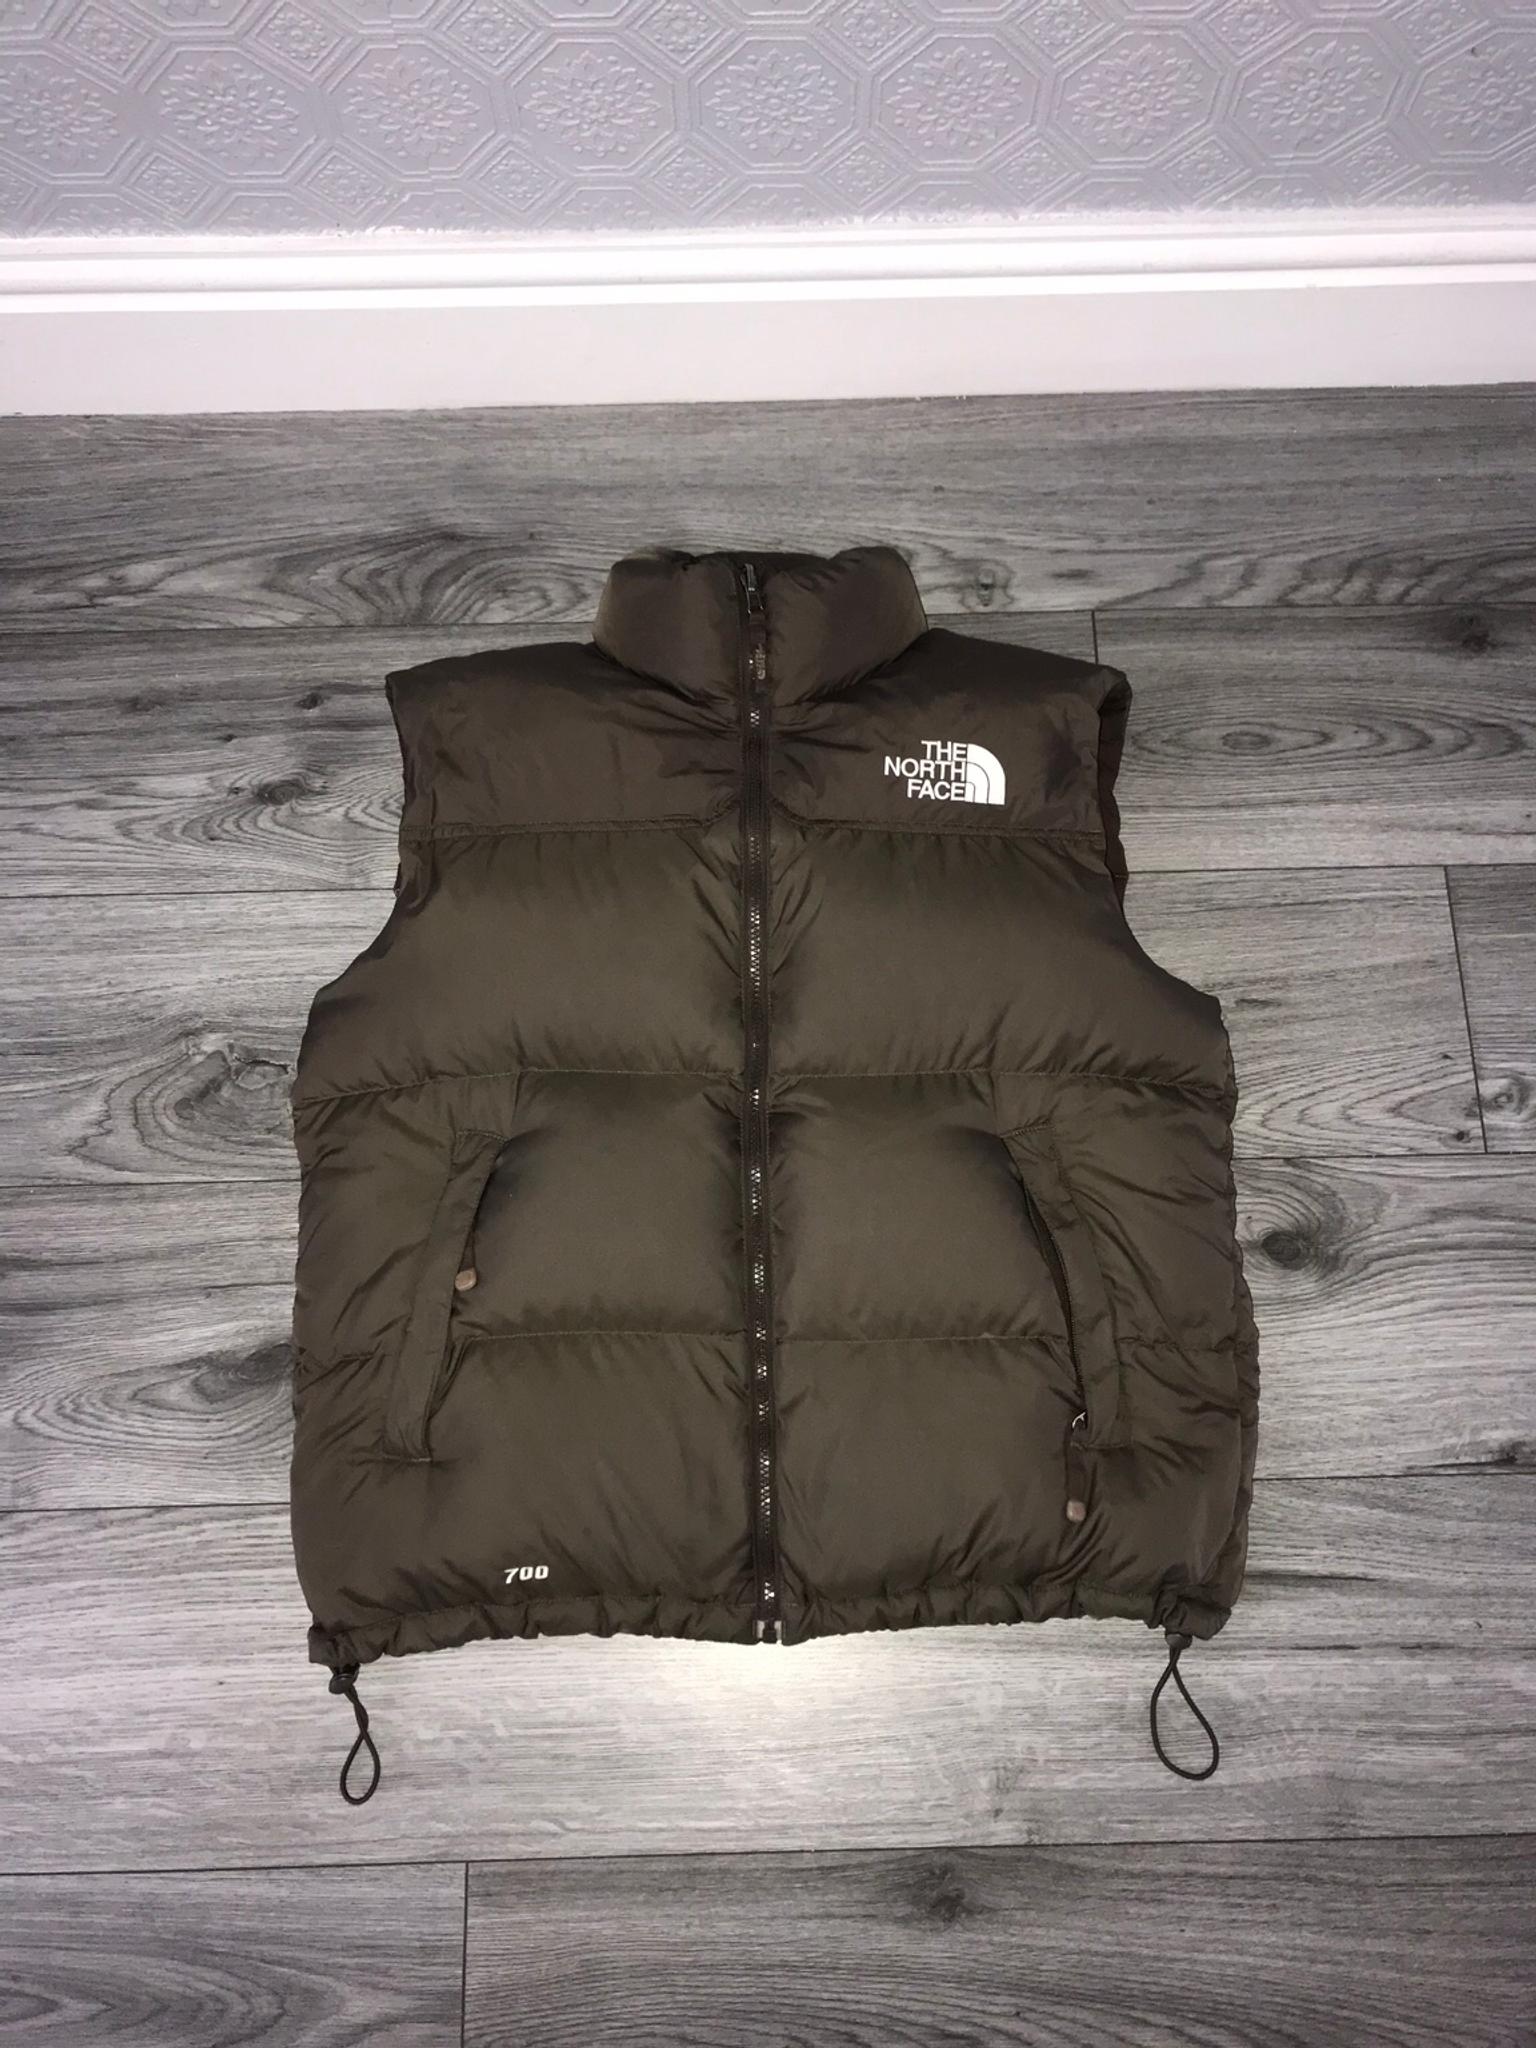 the north face gilet 700